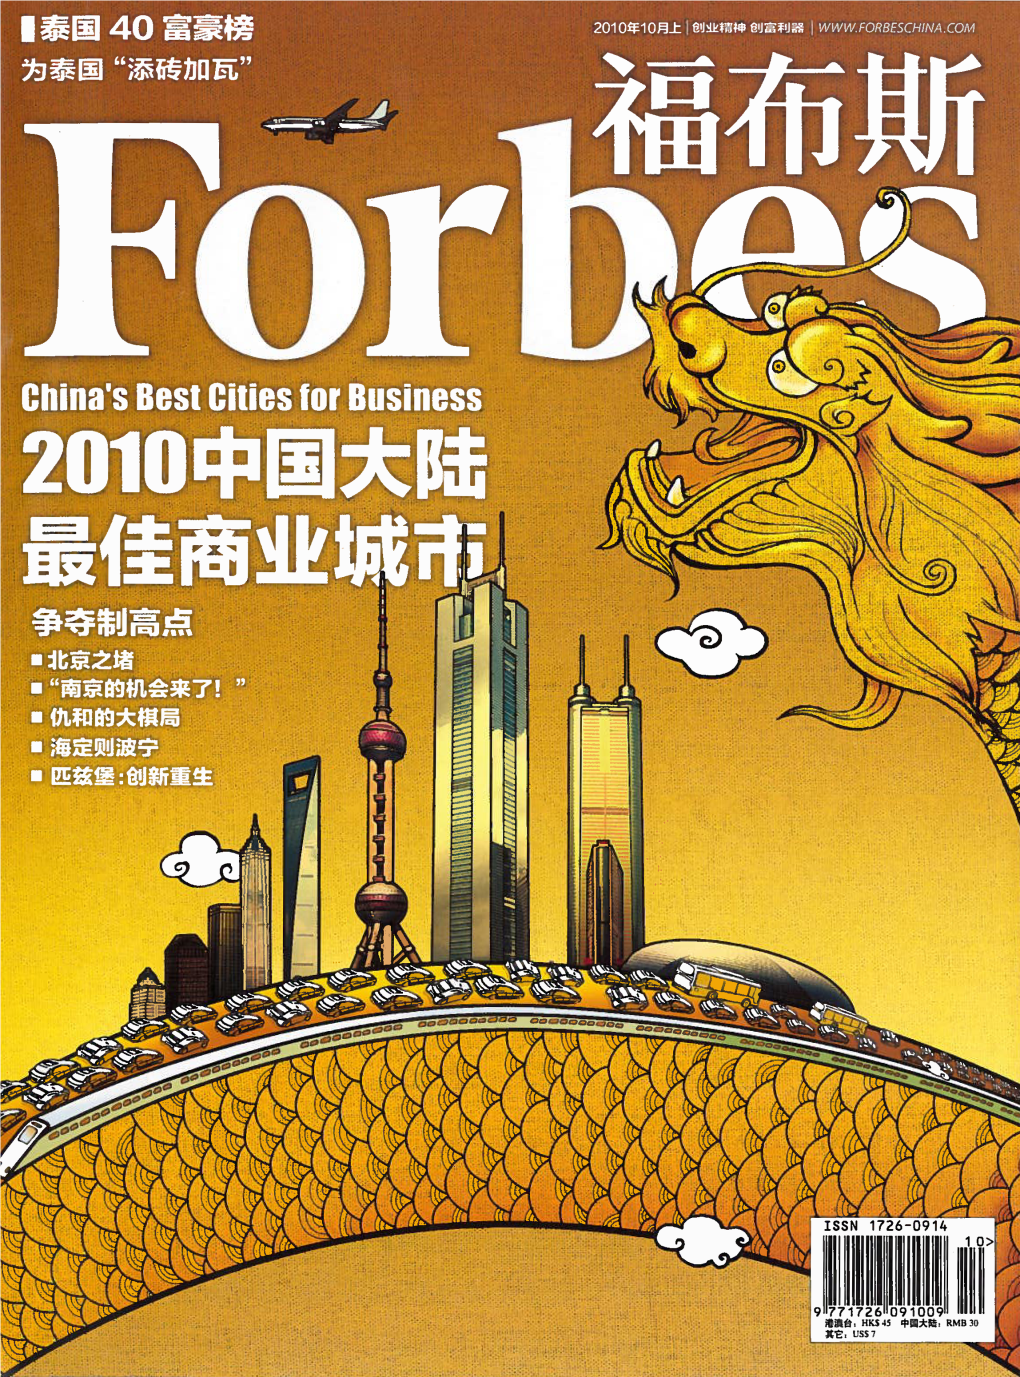 Forbes China Article